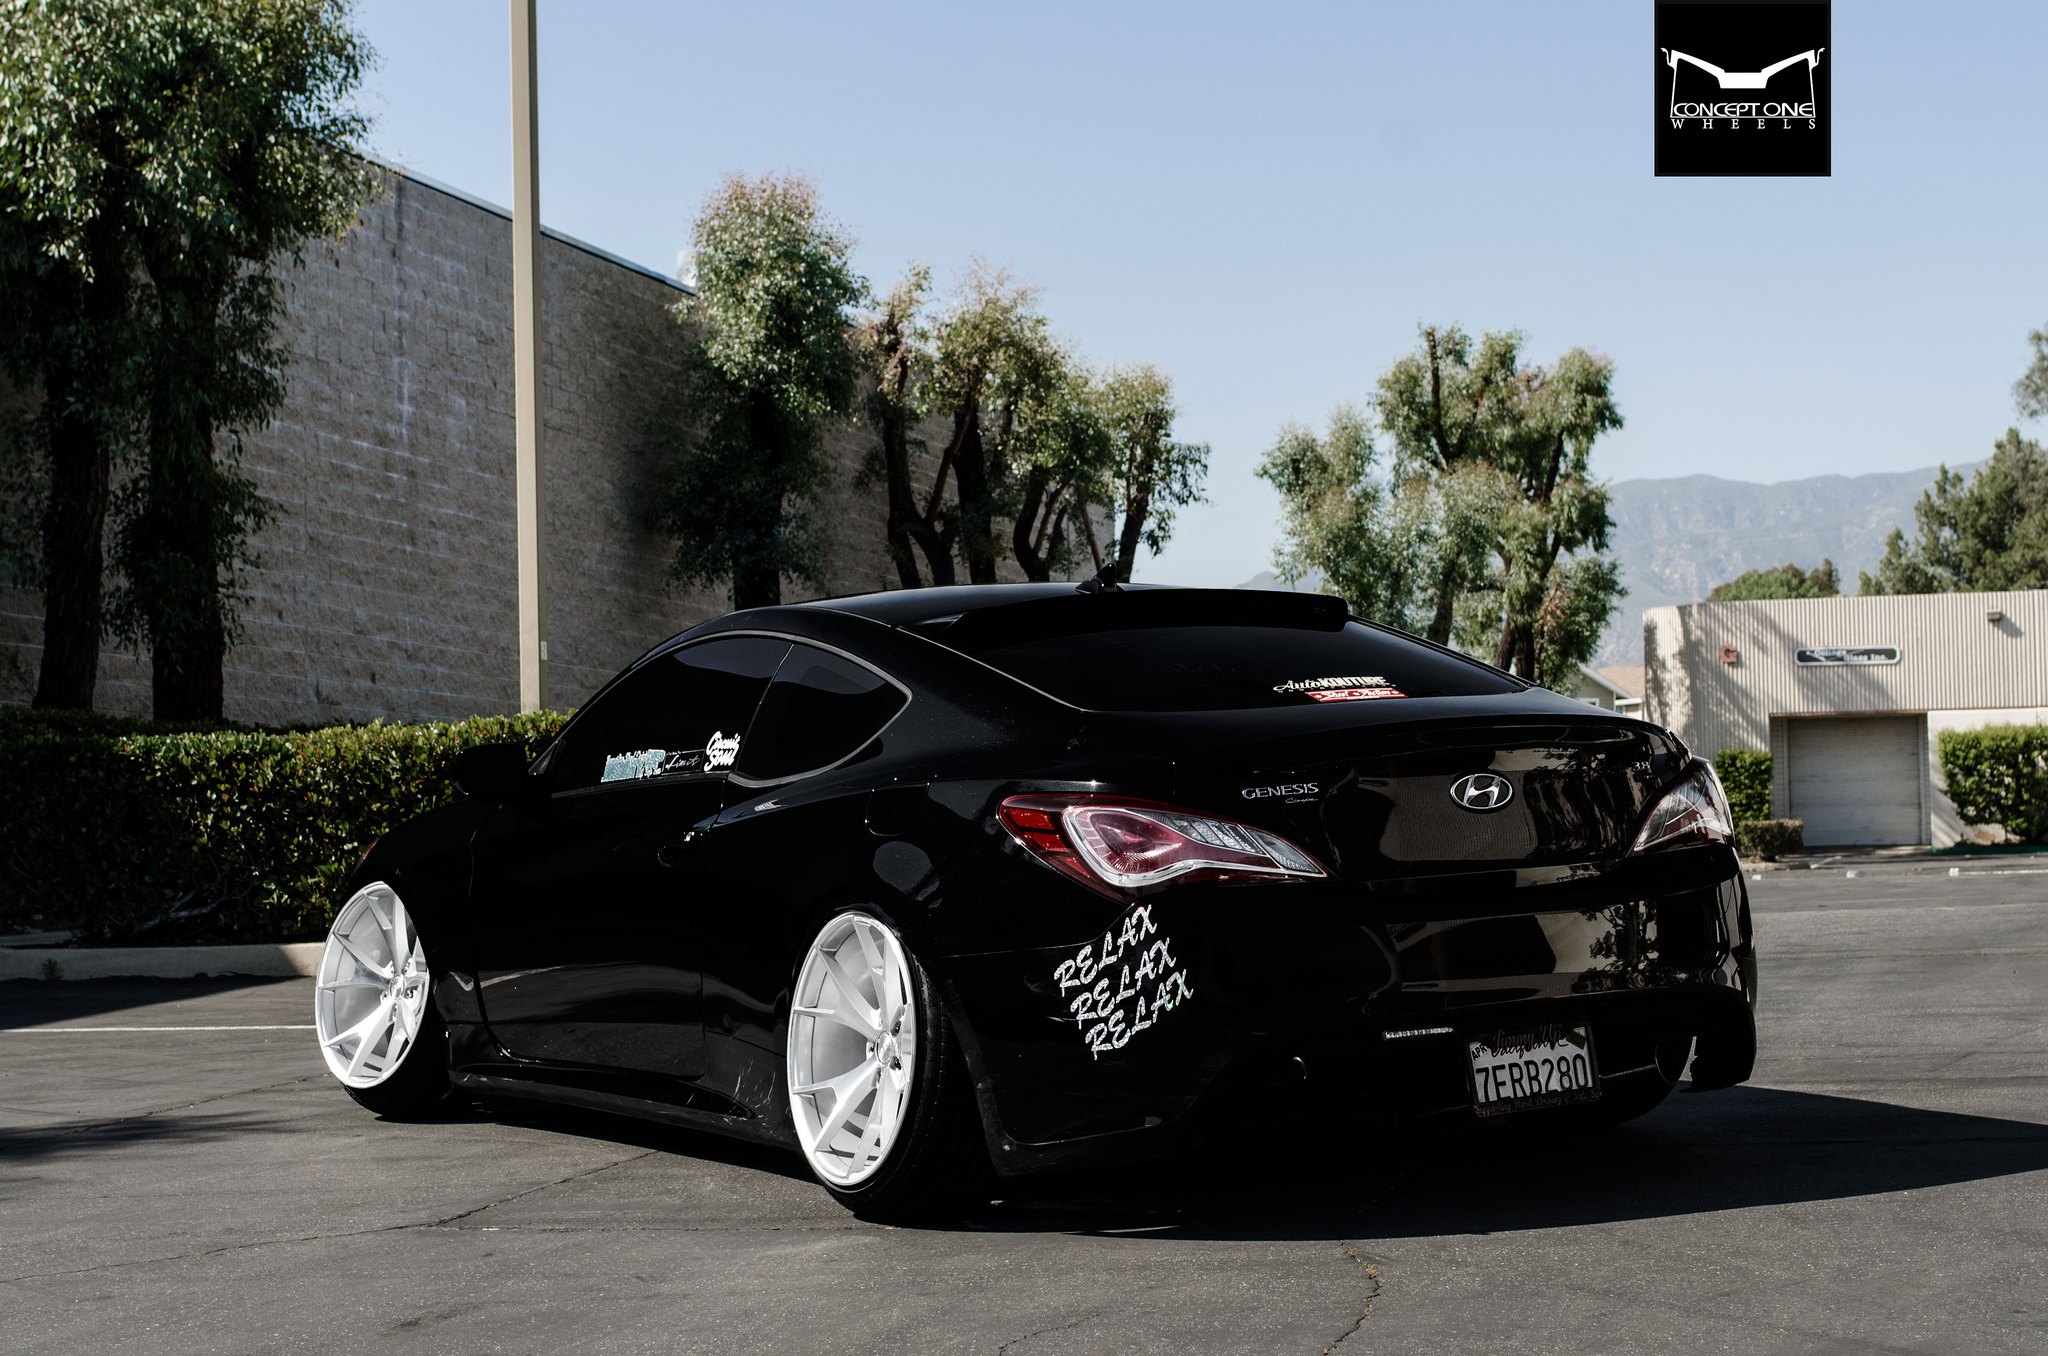 Black Hyundai Genesis Coupe with Custom Taillights - Photo by Concept One